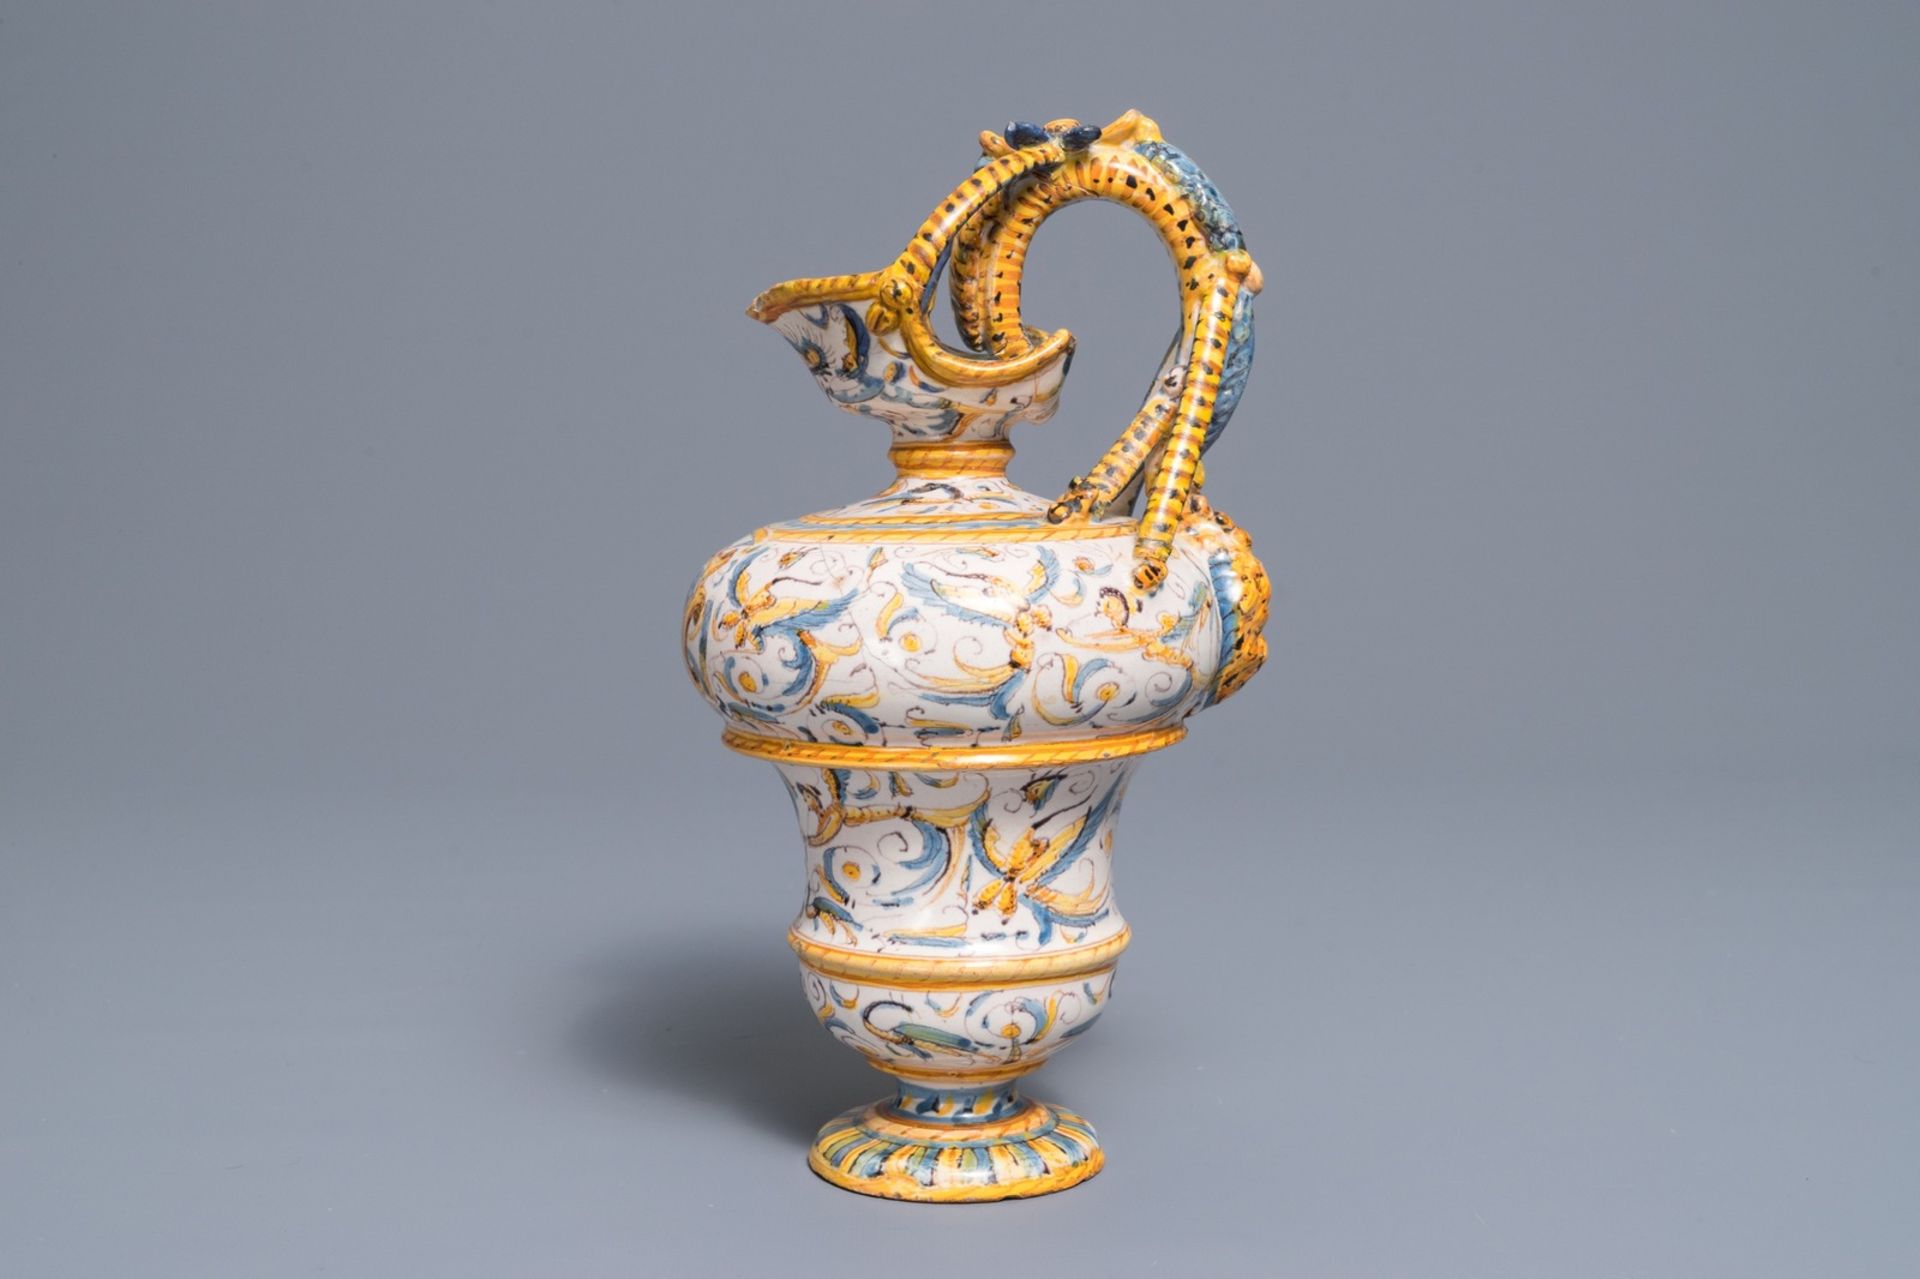 An Italian maiolica jug with grotesques, Caltagirone or Deruta, 17th C. - Image 2 of 7